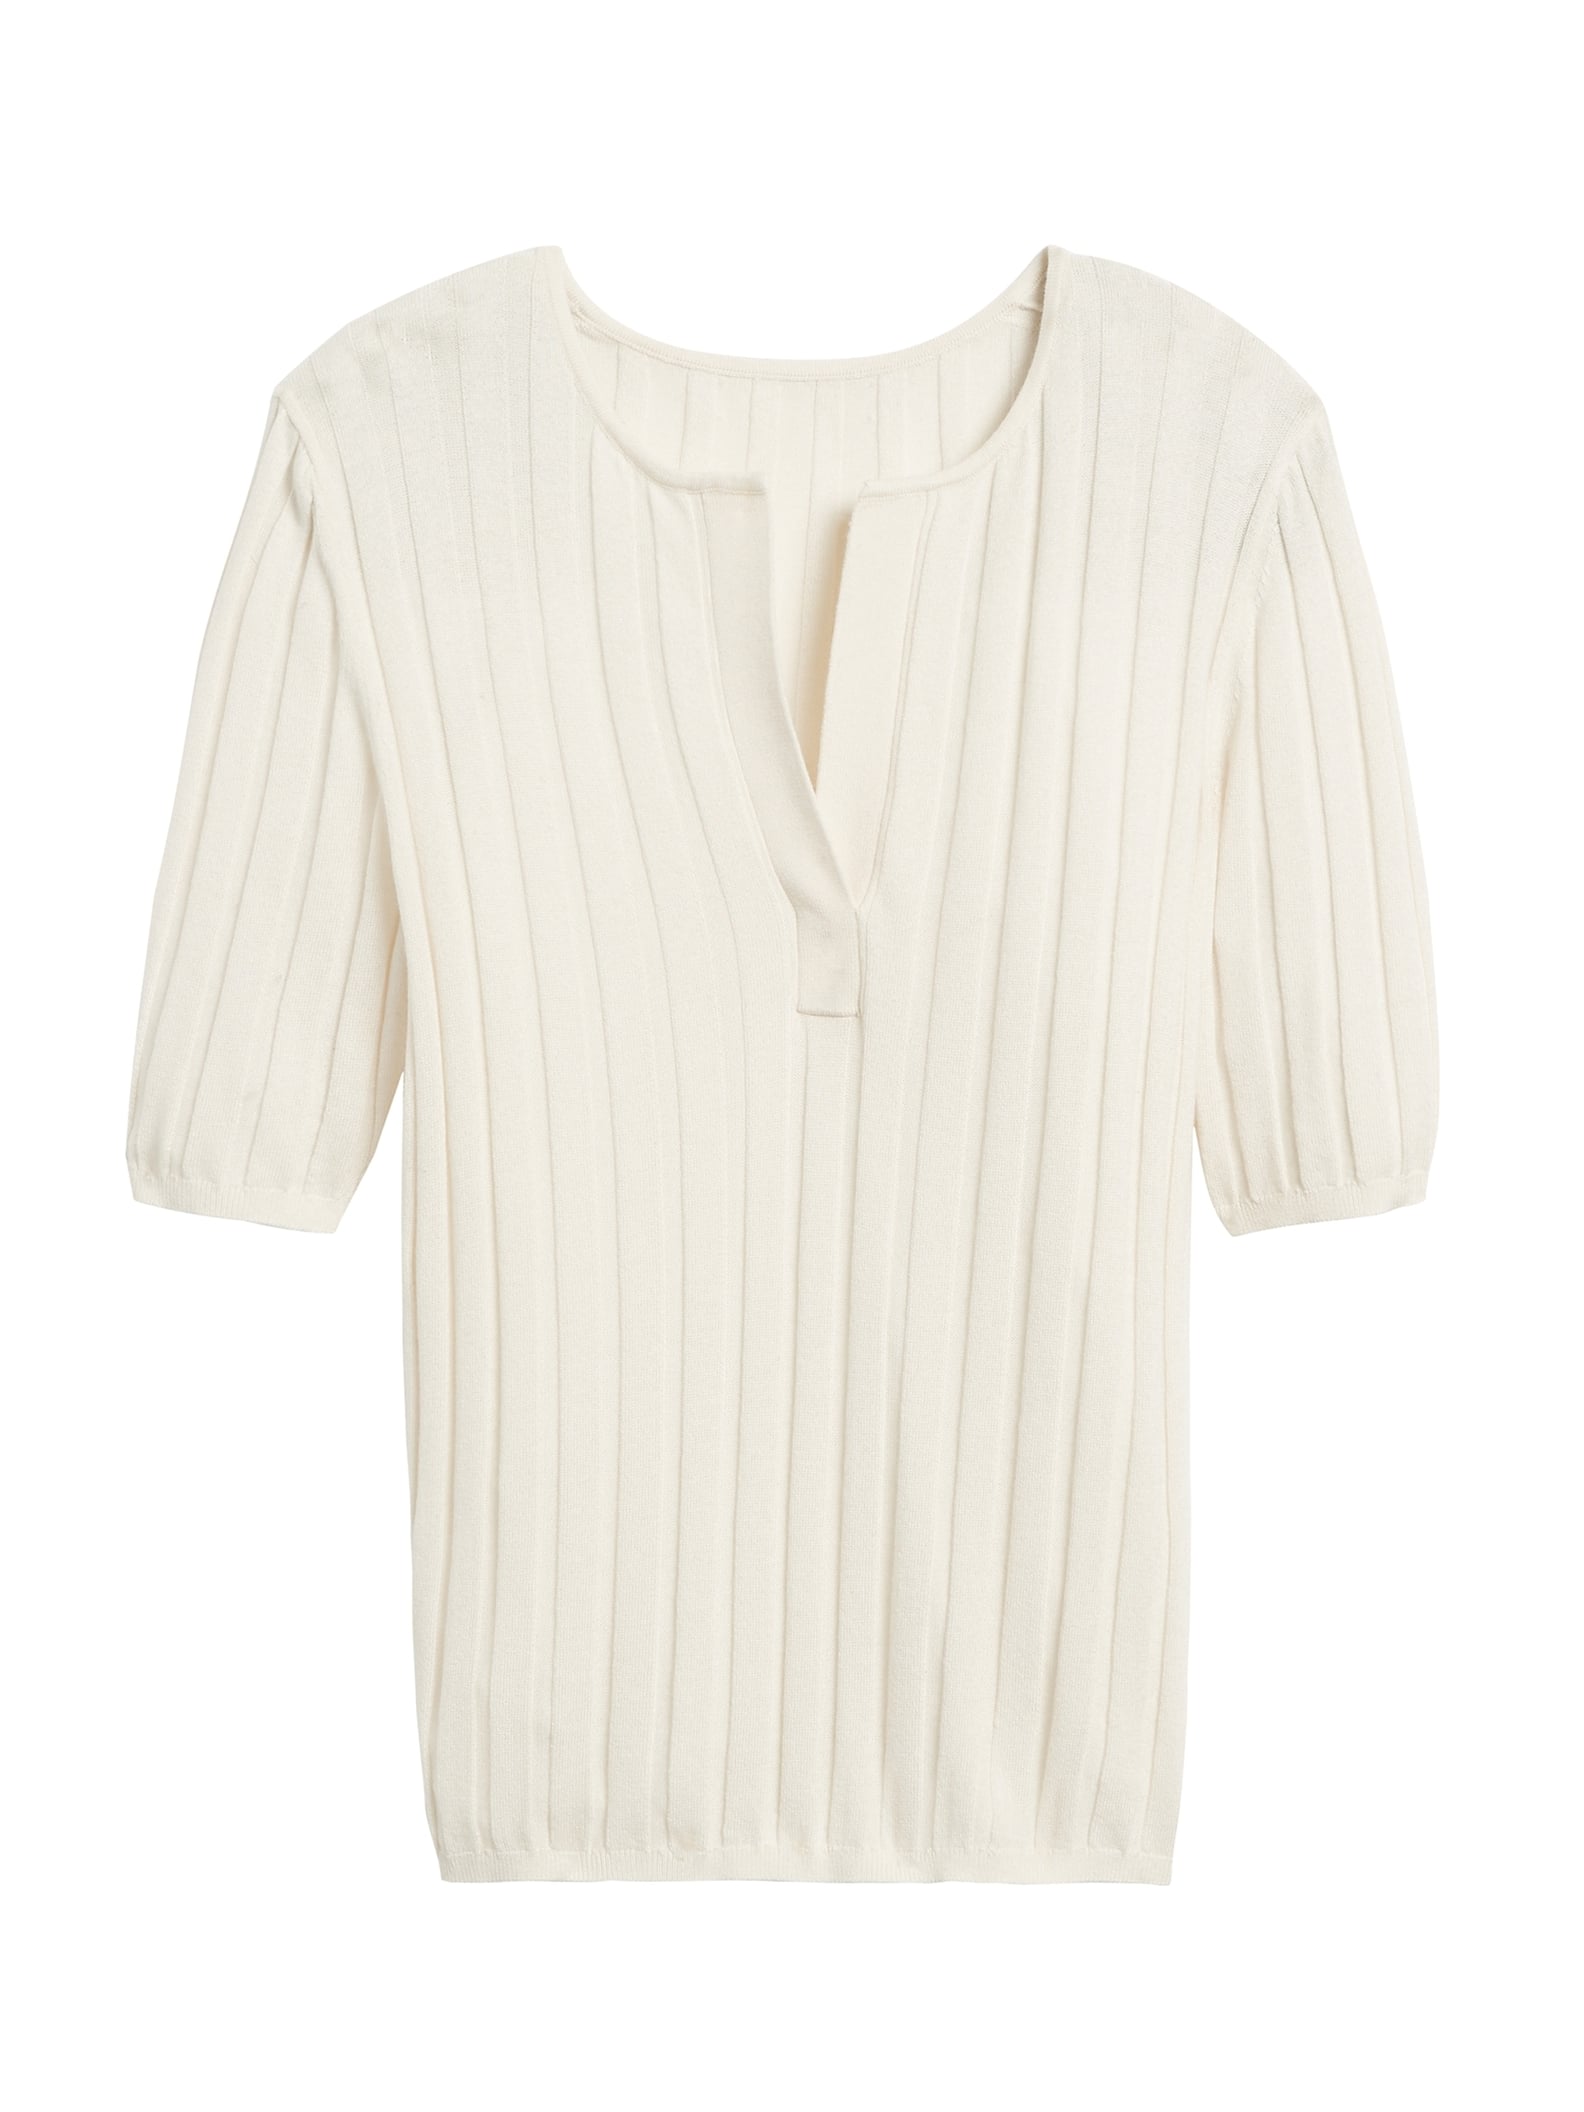 Best Cashmere Gifts From Banana Republic | POPSUGAR Fashion